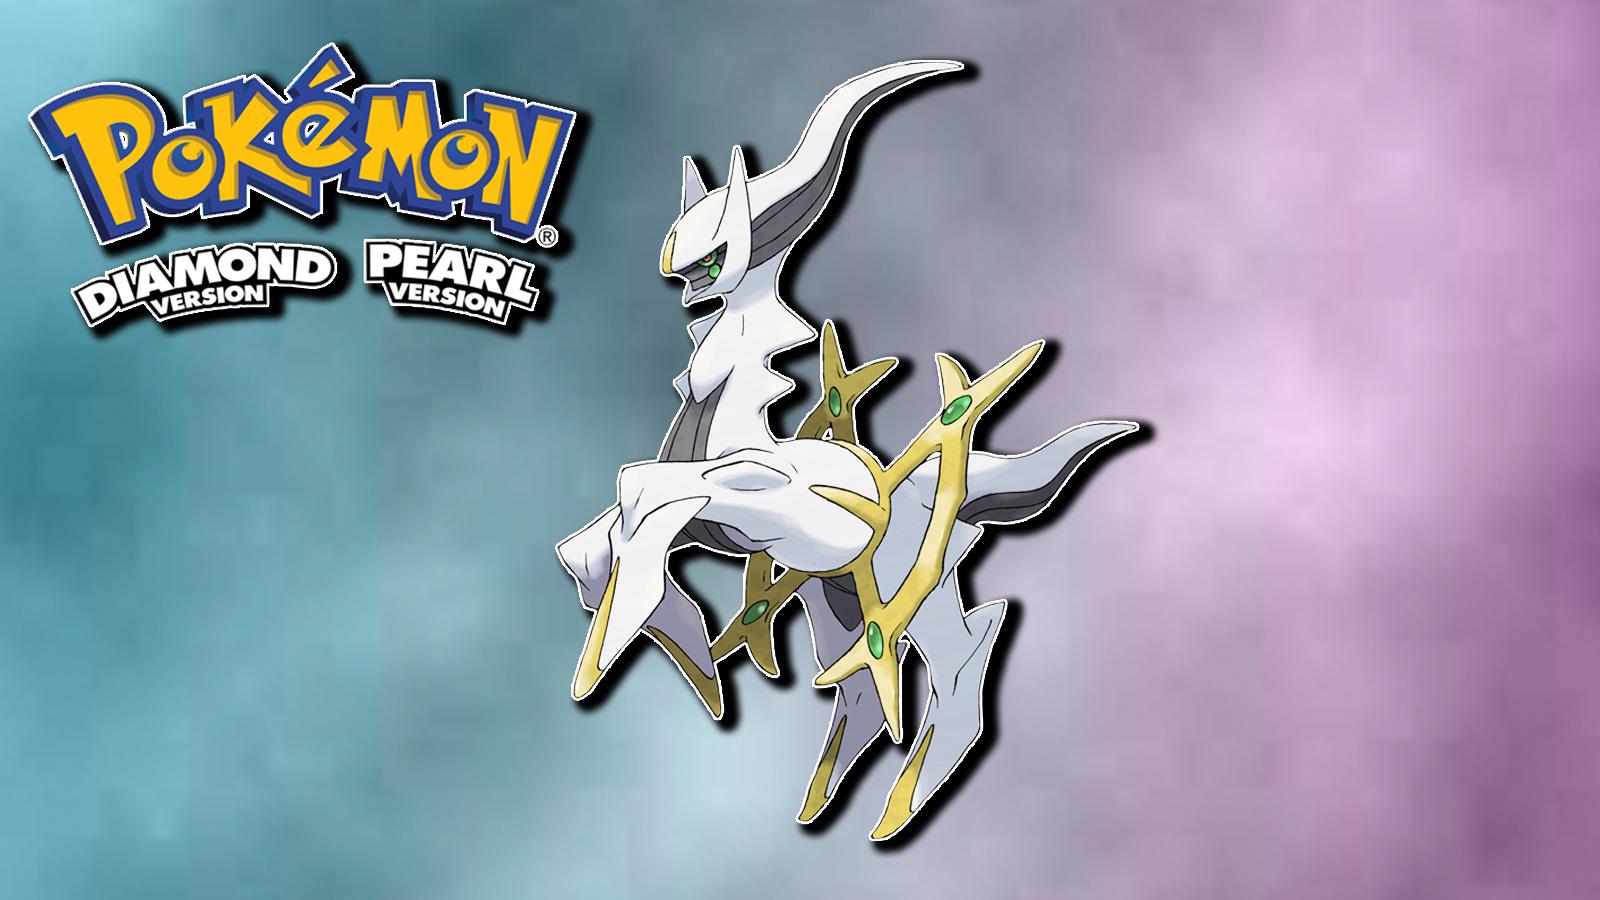 Pokemon Legends: Arceus Reportedly Getting Long-Awaited Feature Soon